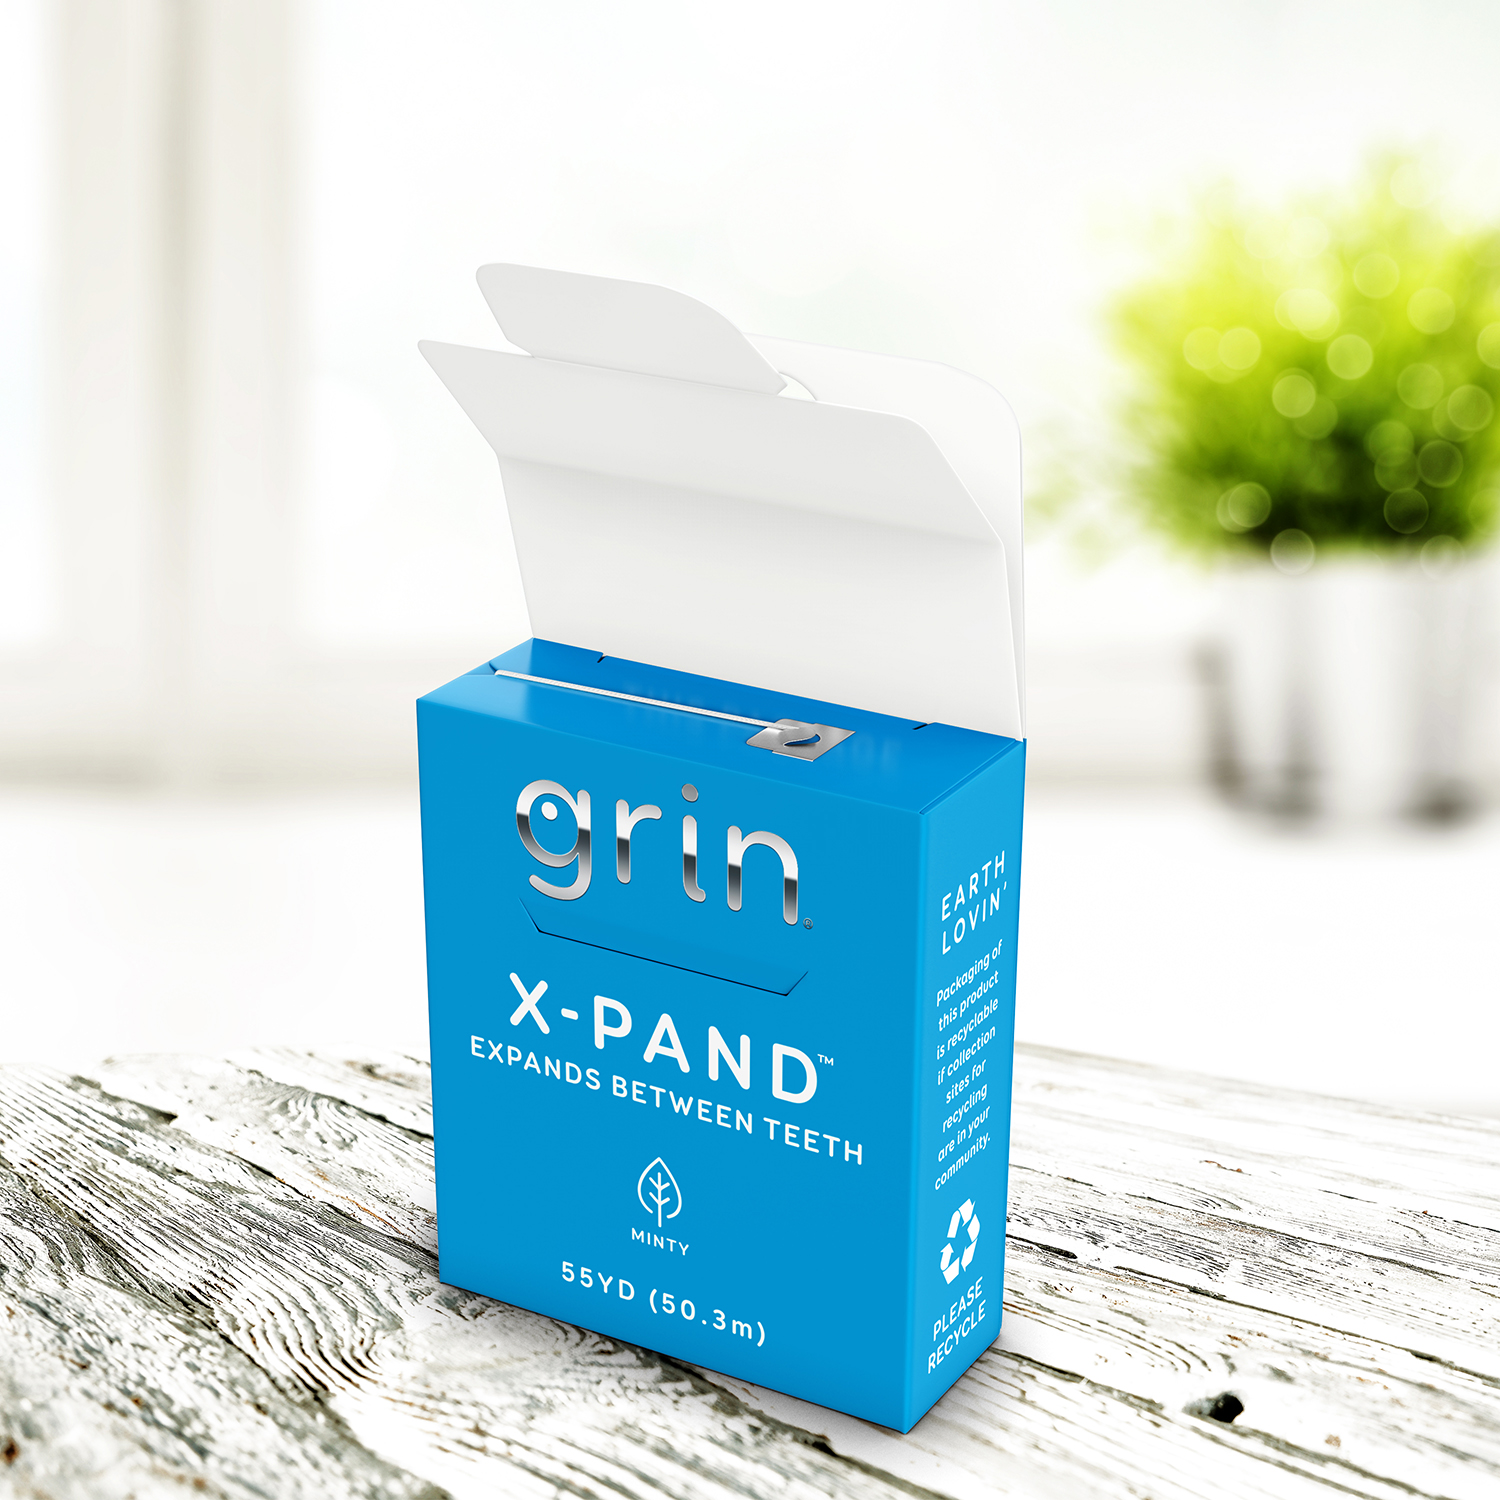 Grin Oral Care X-Pand Floss Box